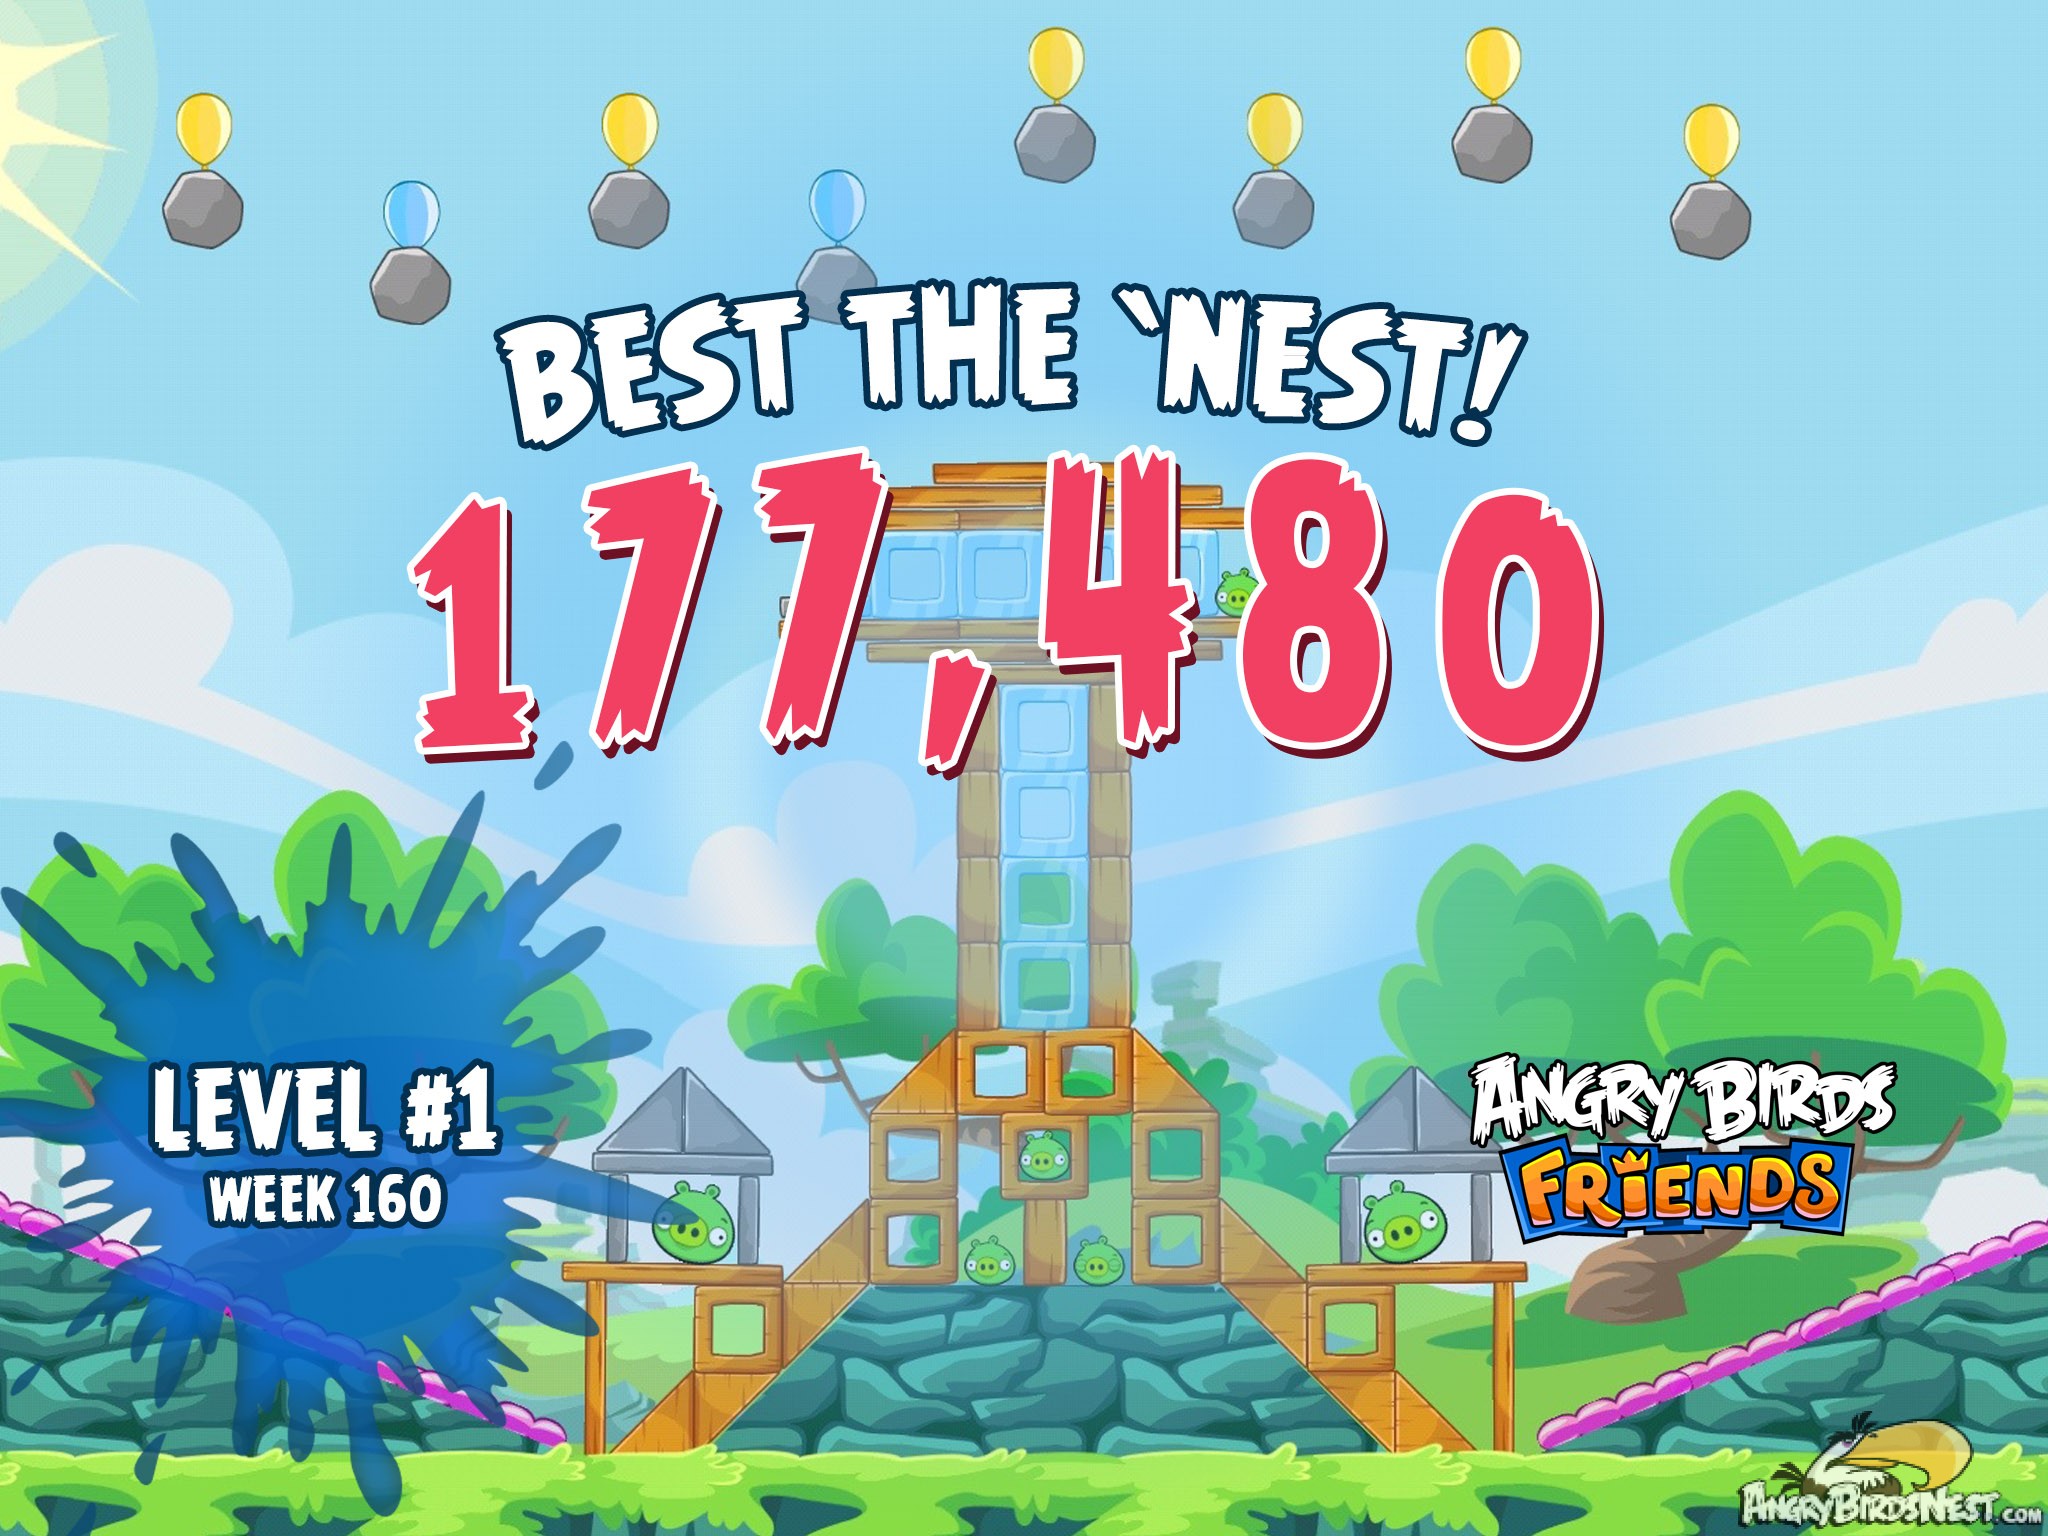 Angry Birds Friends Best the Nest Challenge Week 11